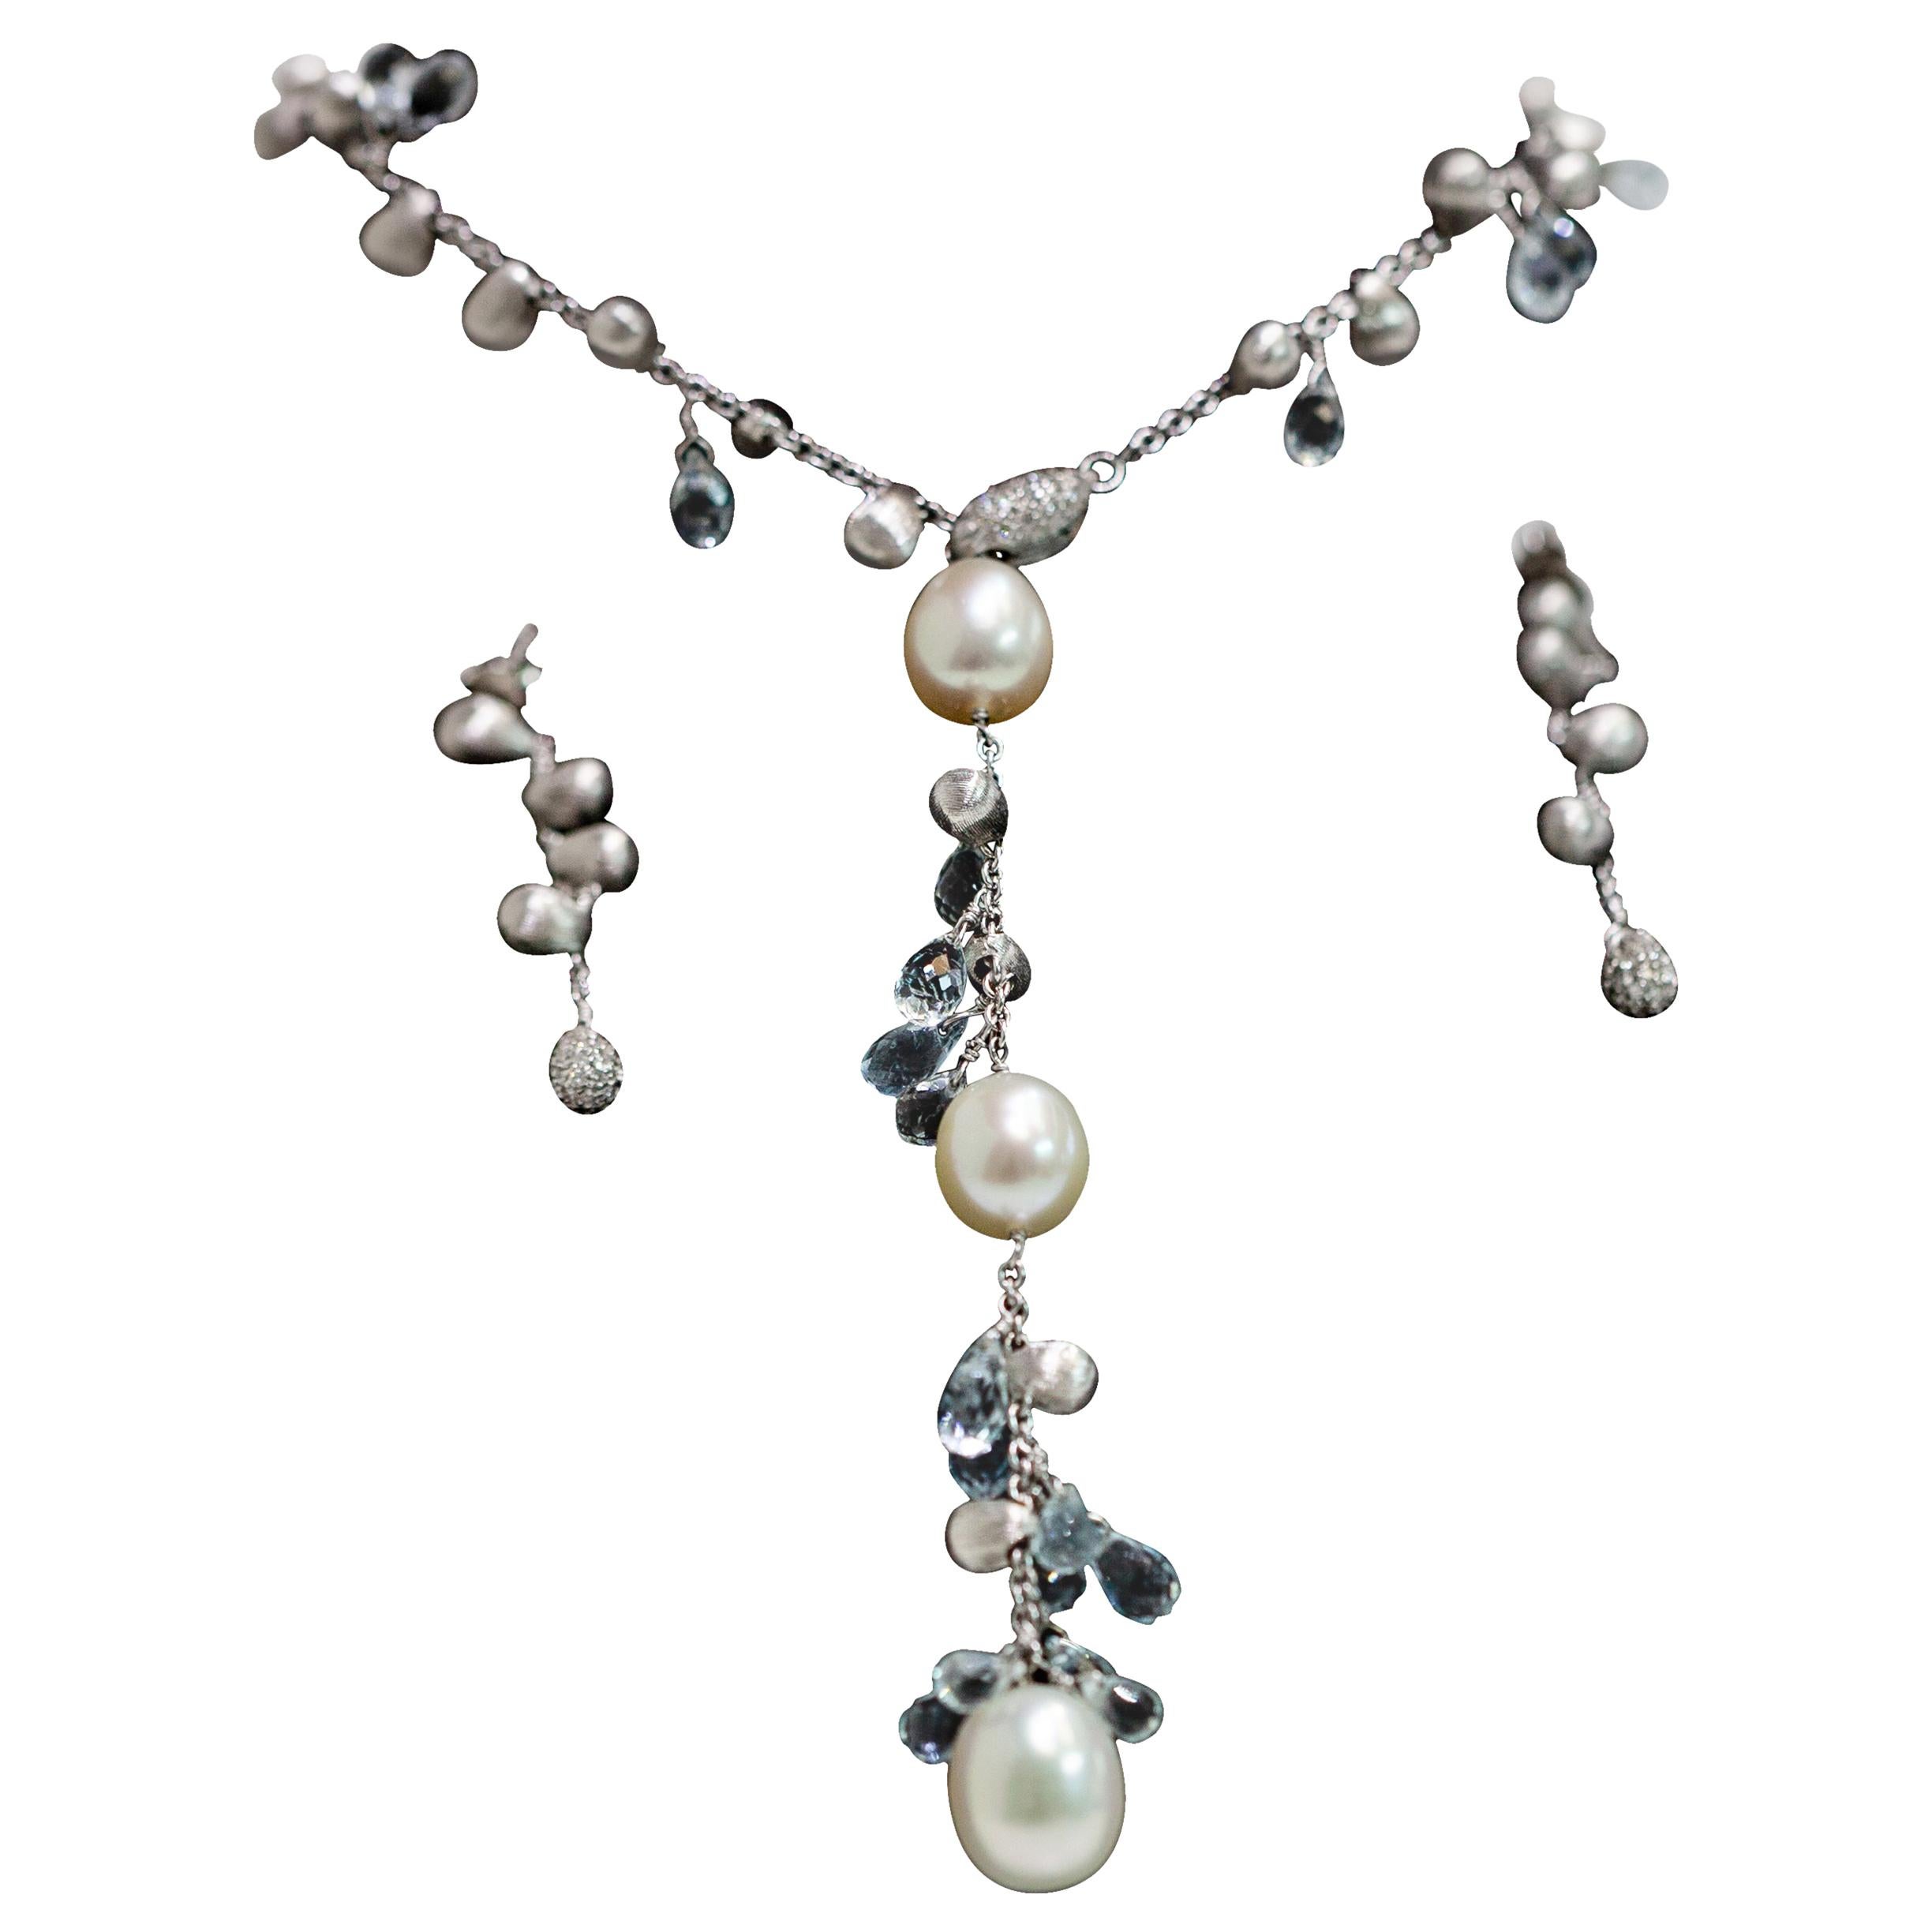 Marco Bicego 18k White Gold Lariat Necklace & Earrings With Blue Topaz & Pearl For Sale